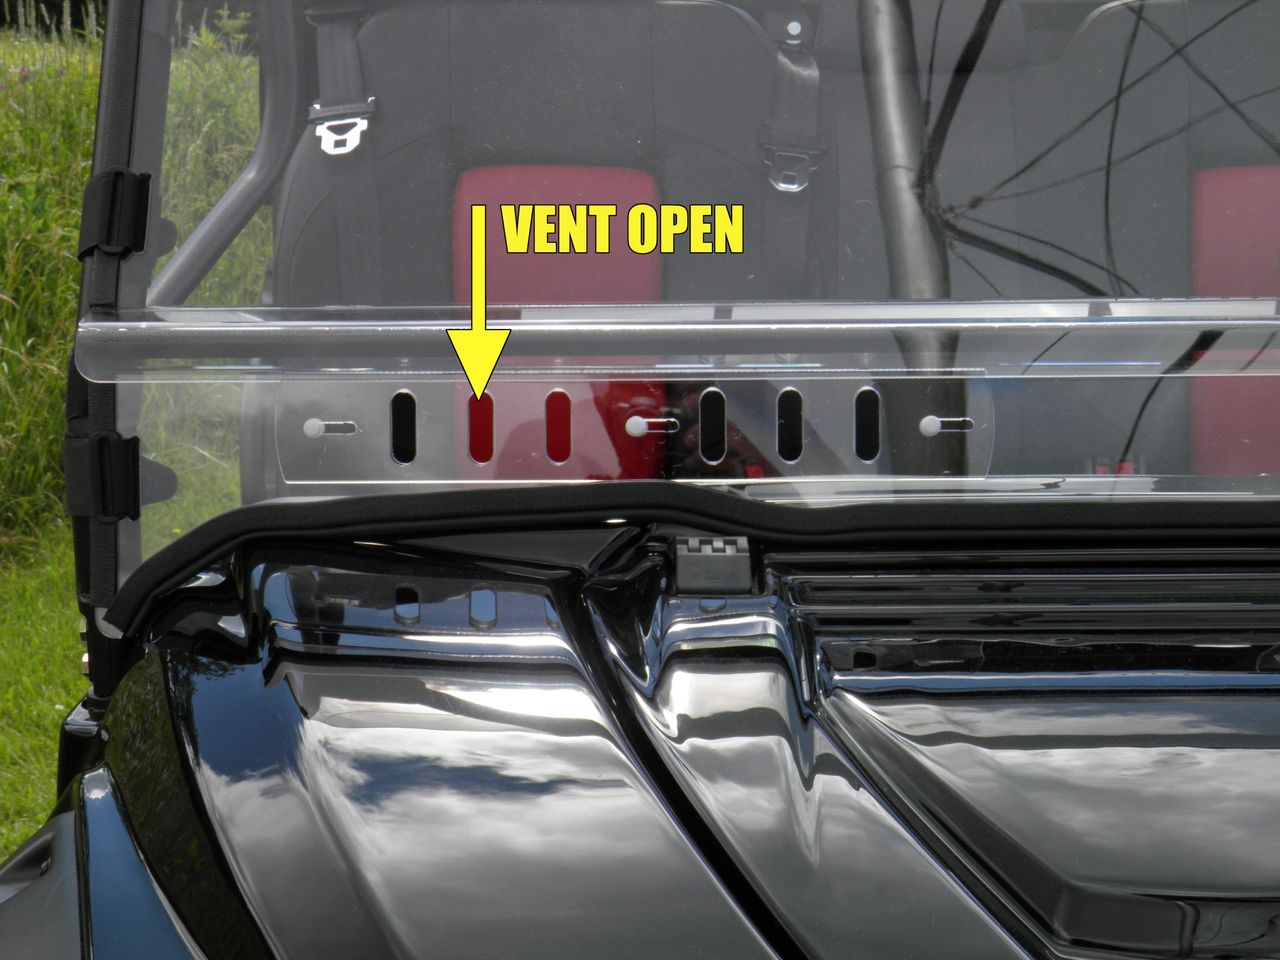 3 Star side x side can-am maverick and max windshield vents open